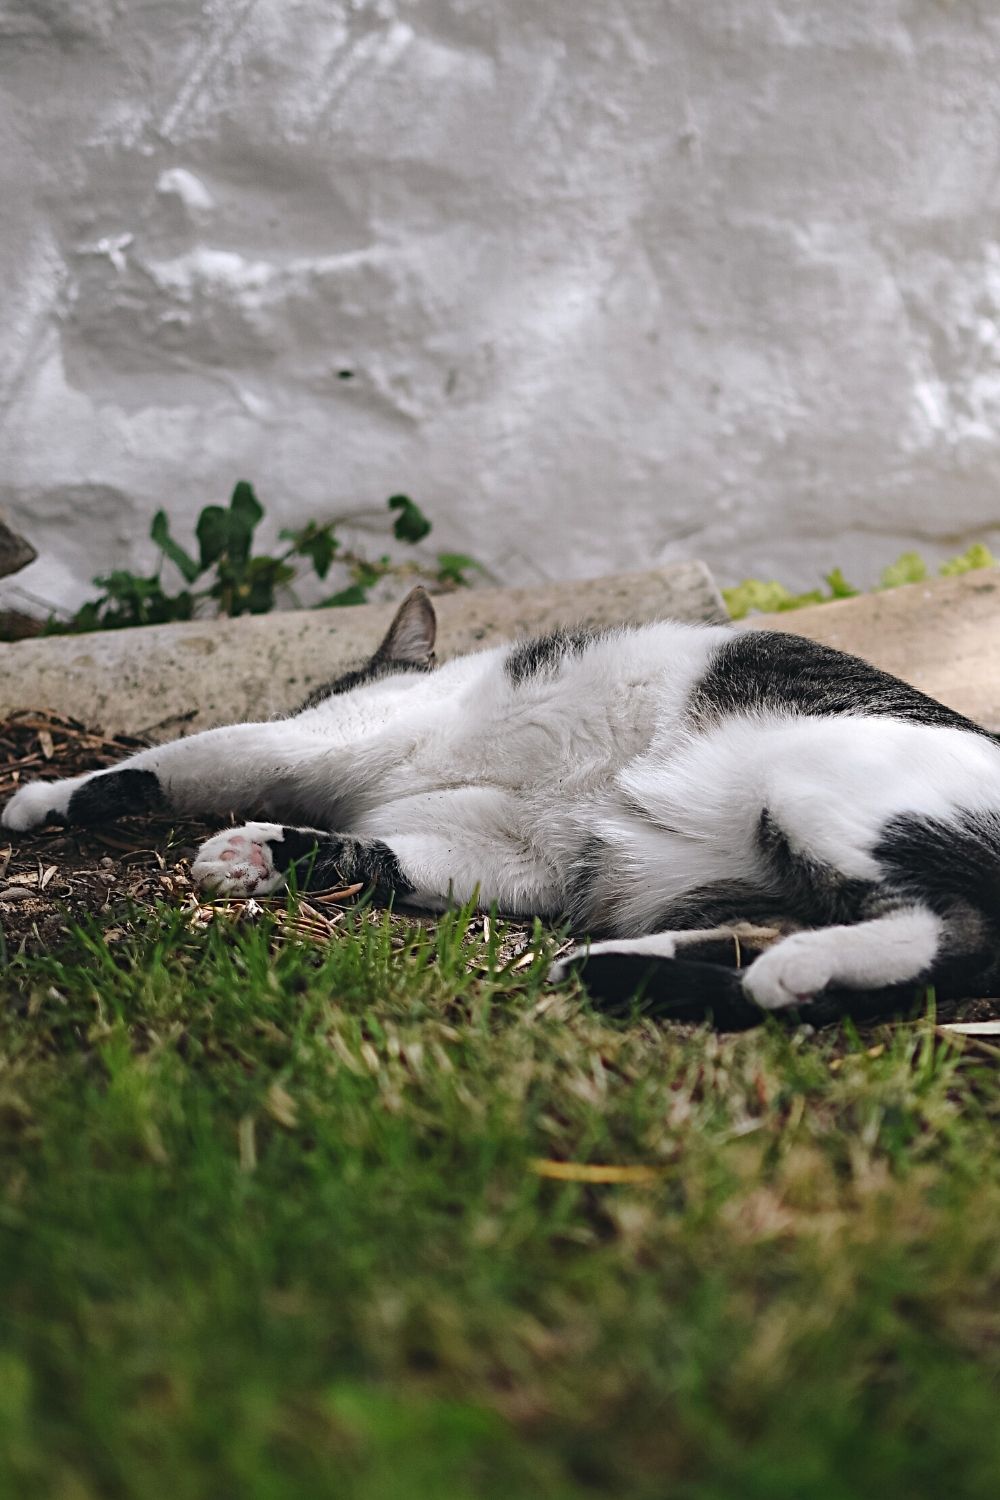 Cats roll in the dirt to cool themselves off, especially when they dig a dirt hole